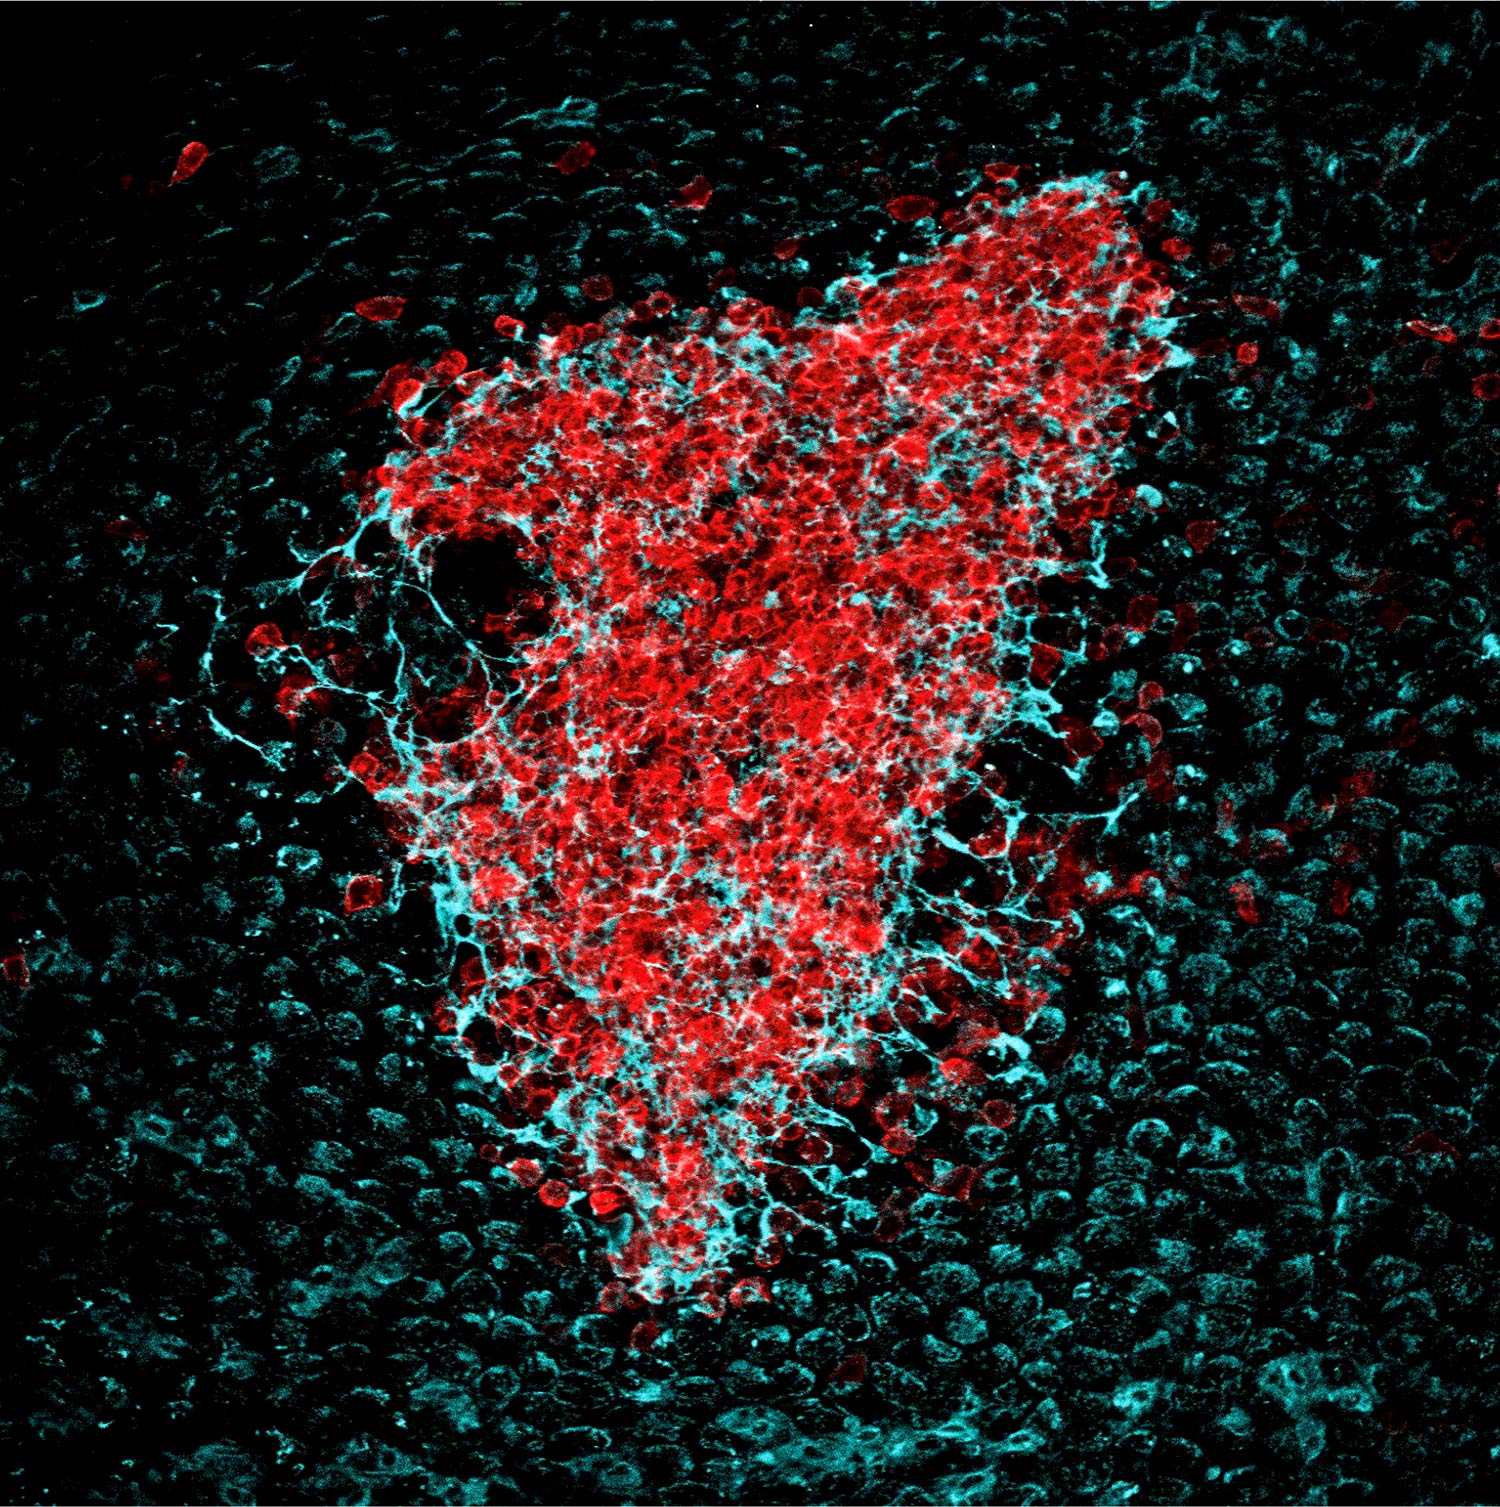 Imaging of the peritoneal wall by whole mount immunofluorescence combined with confocal microscopy, at 4 hours after intraperitoneal Escherichia coli infection, showing a resMØ-aggregate harboring a developed fibrin nerwork. Red: F4/80, peritoneal macrophages; blue: fibrinogen (Vega-Pérez et al., Immunity 2021).